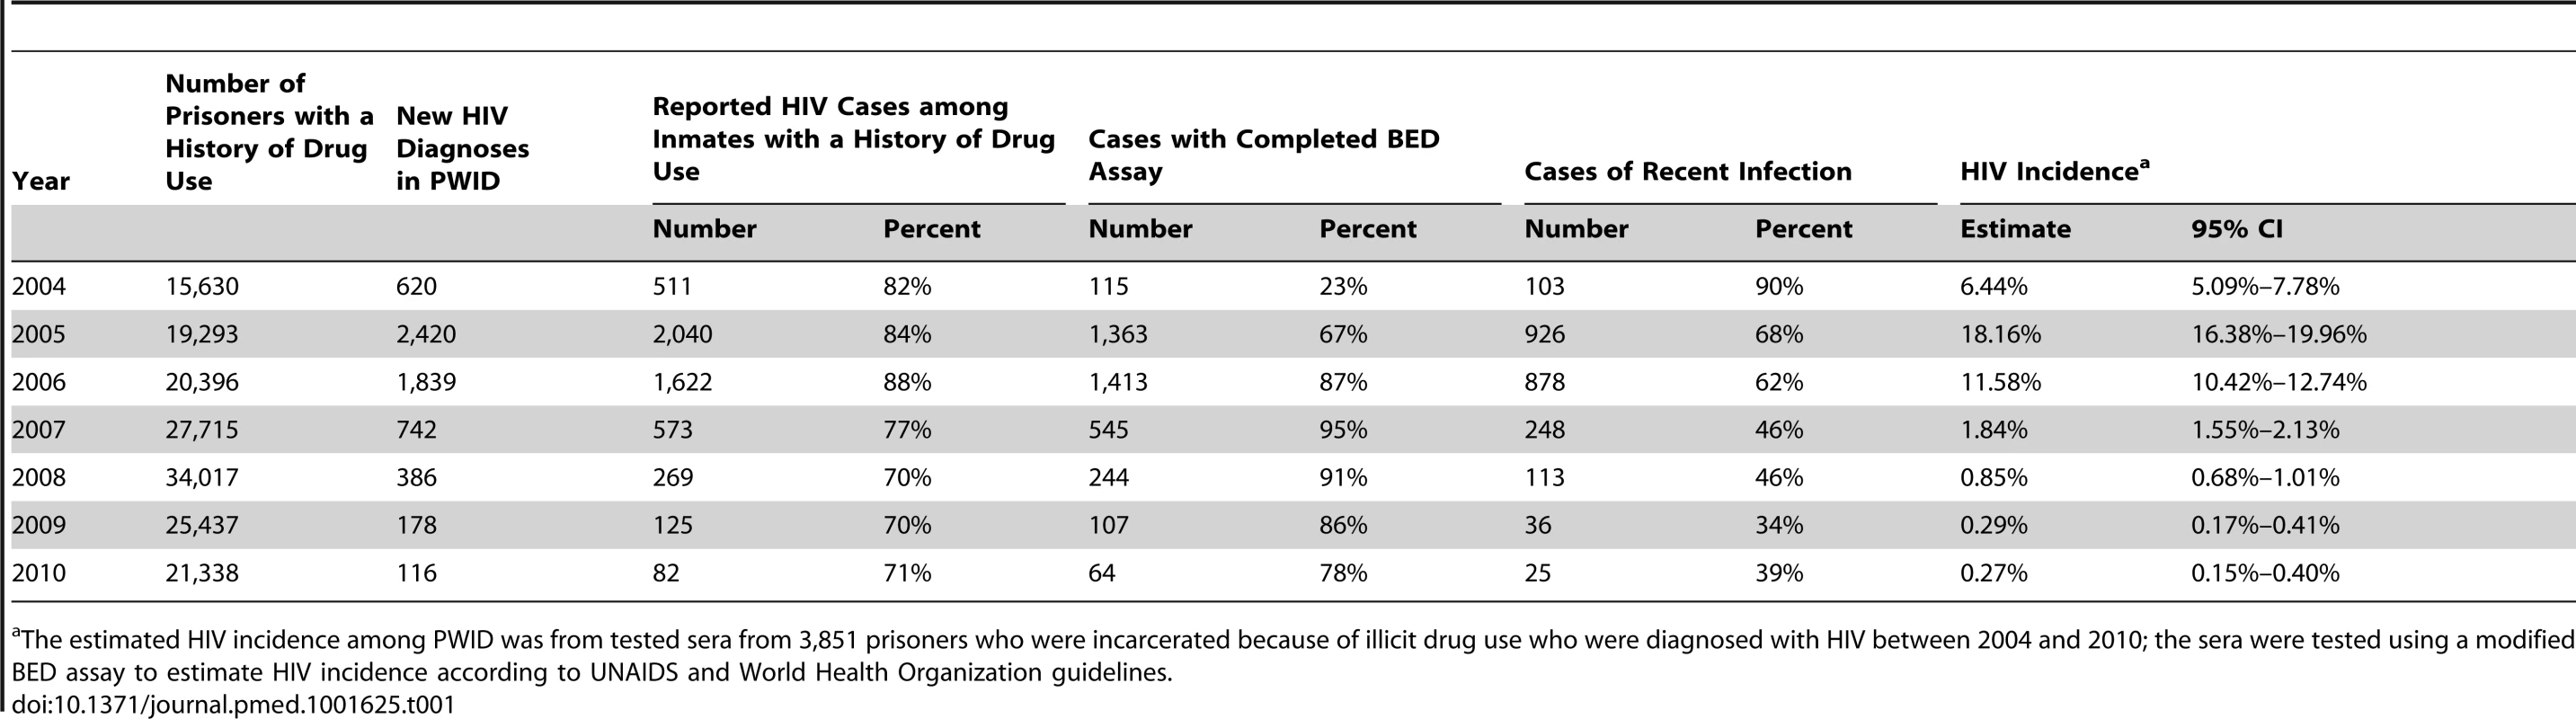 The distribution of prisoners with histories of drug use and their HIV status.